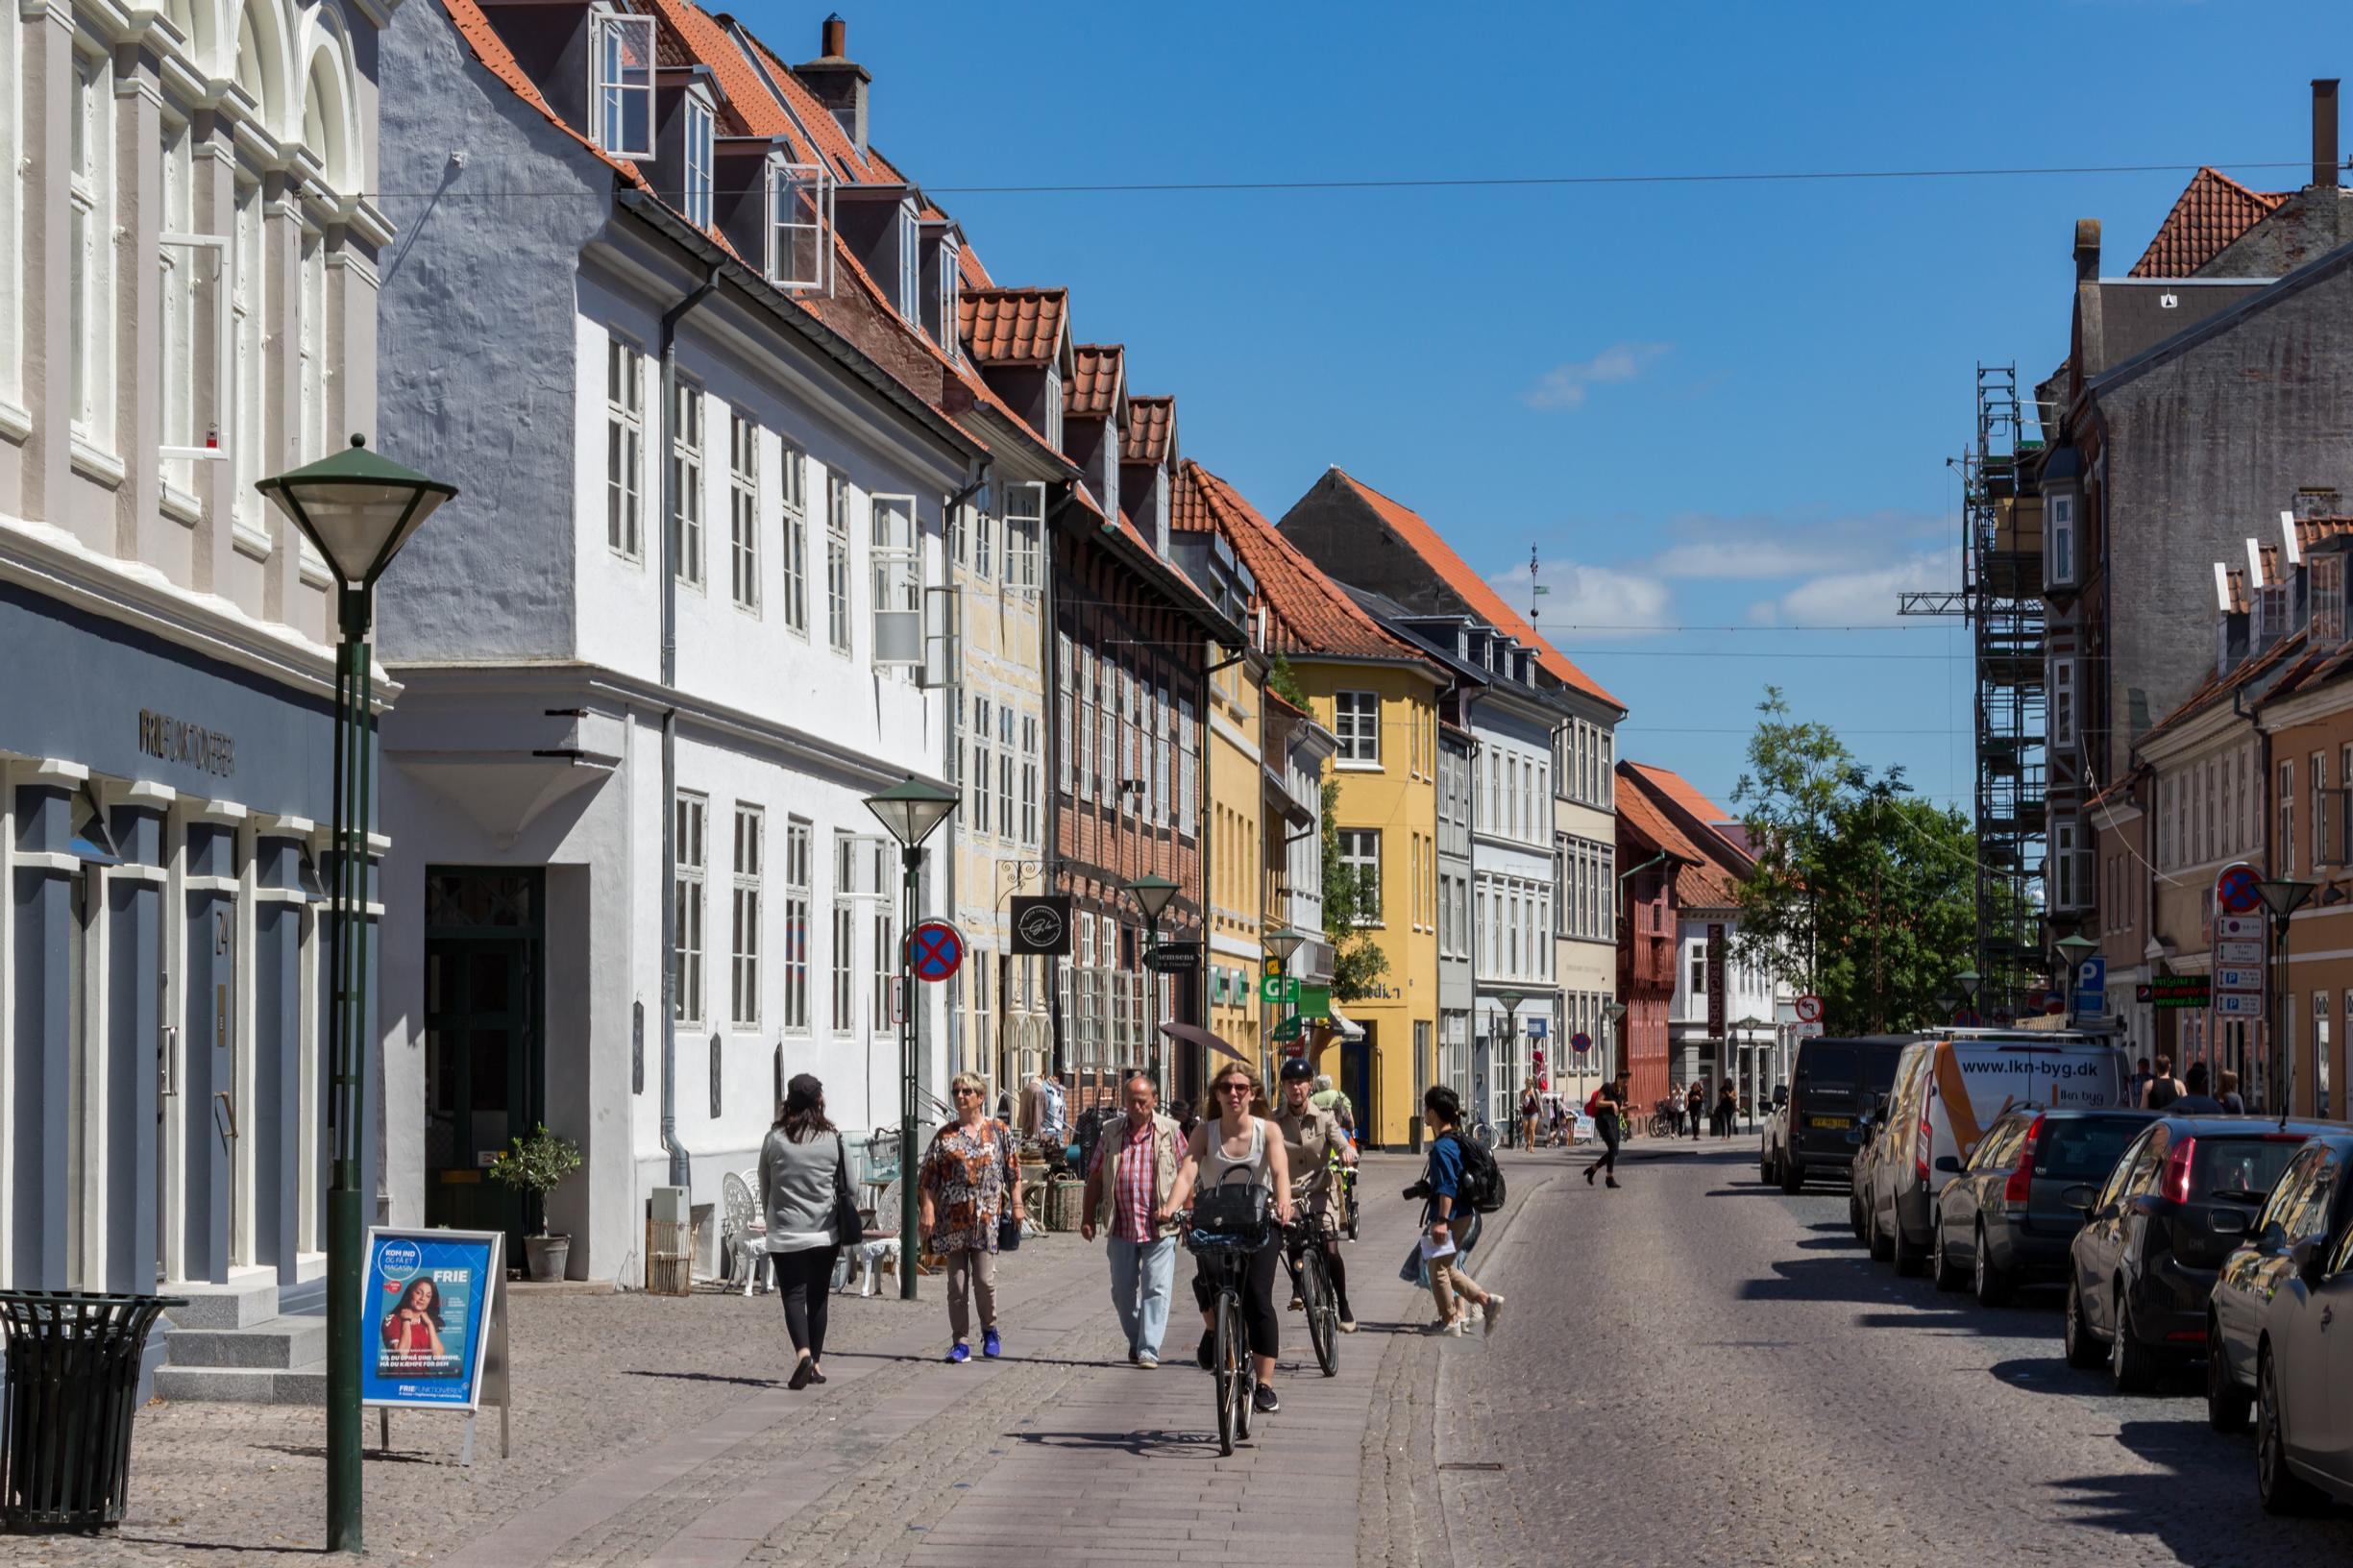 Despite its cycling culture, with 28% of all trips by bike, Copenhagen is only slightly less car-dependent than London